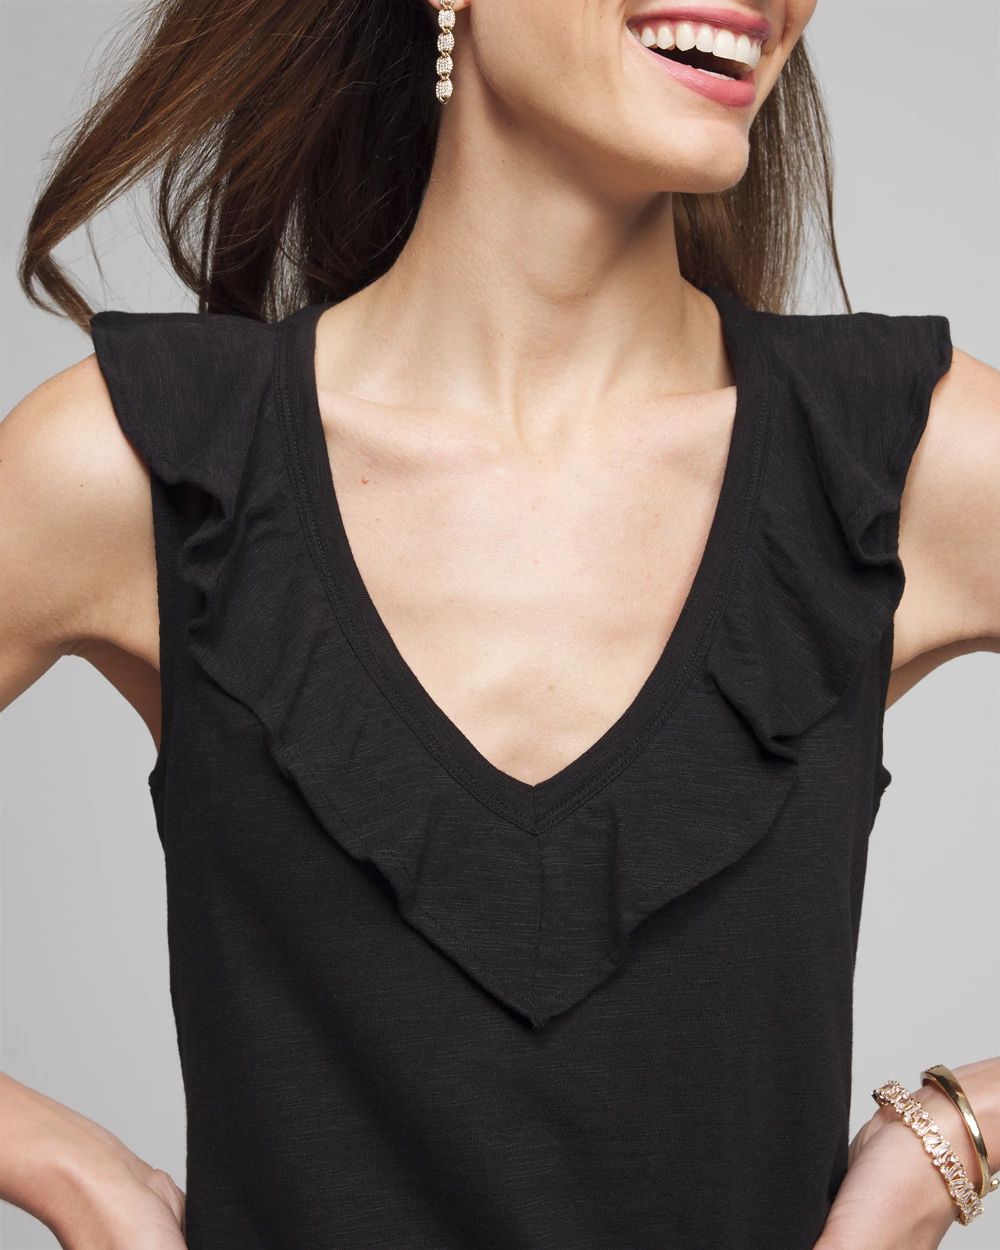 Outlet WHBM Ruffle Tank